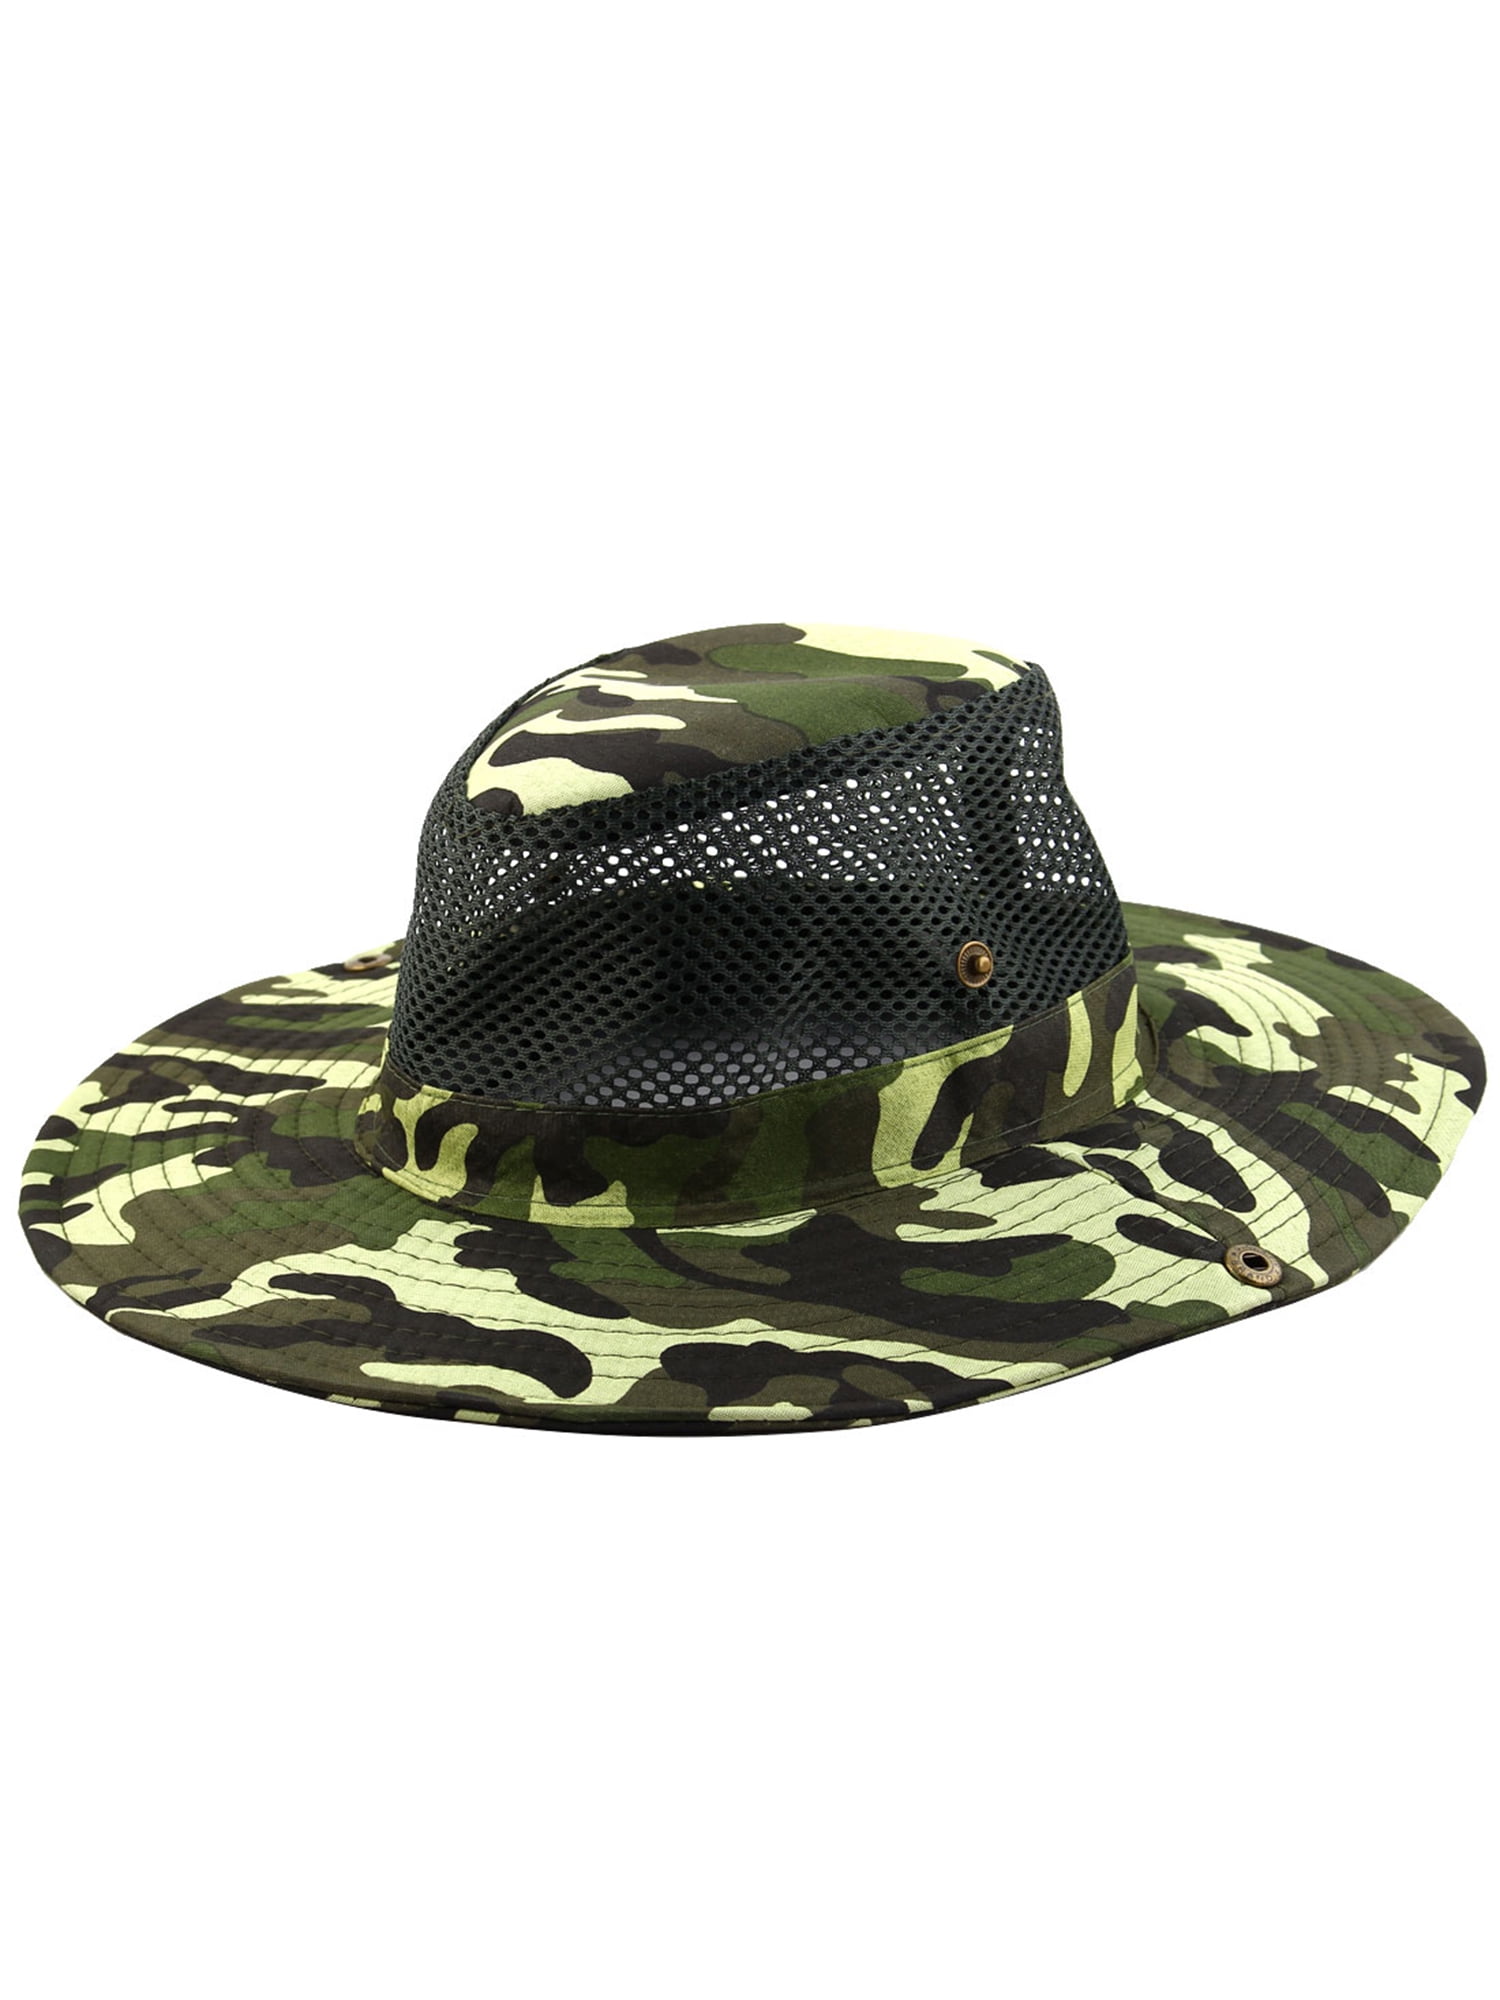 Sourcingmap Men Summer Outdoor Polyster Wide Brim Western Style Camouflage Mesh Cap Net Sunhat Cowboy Hat Army Green 